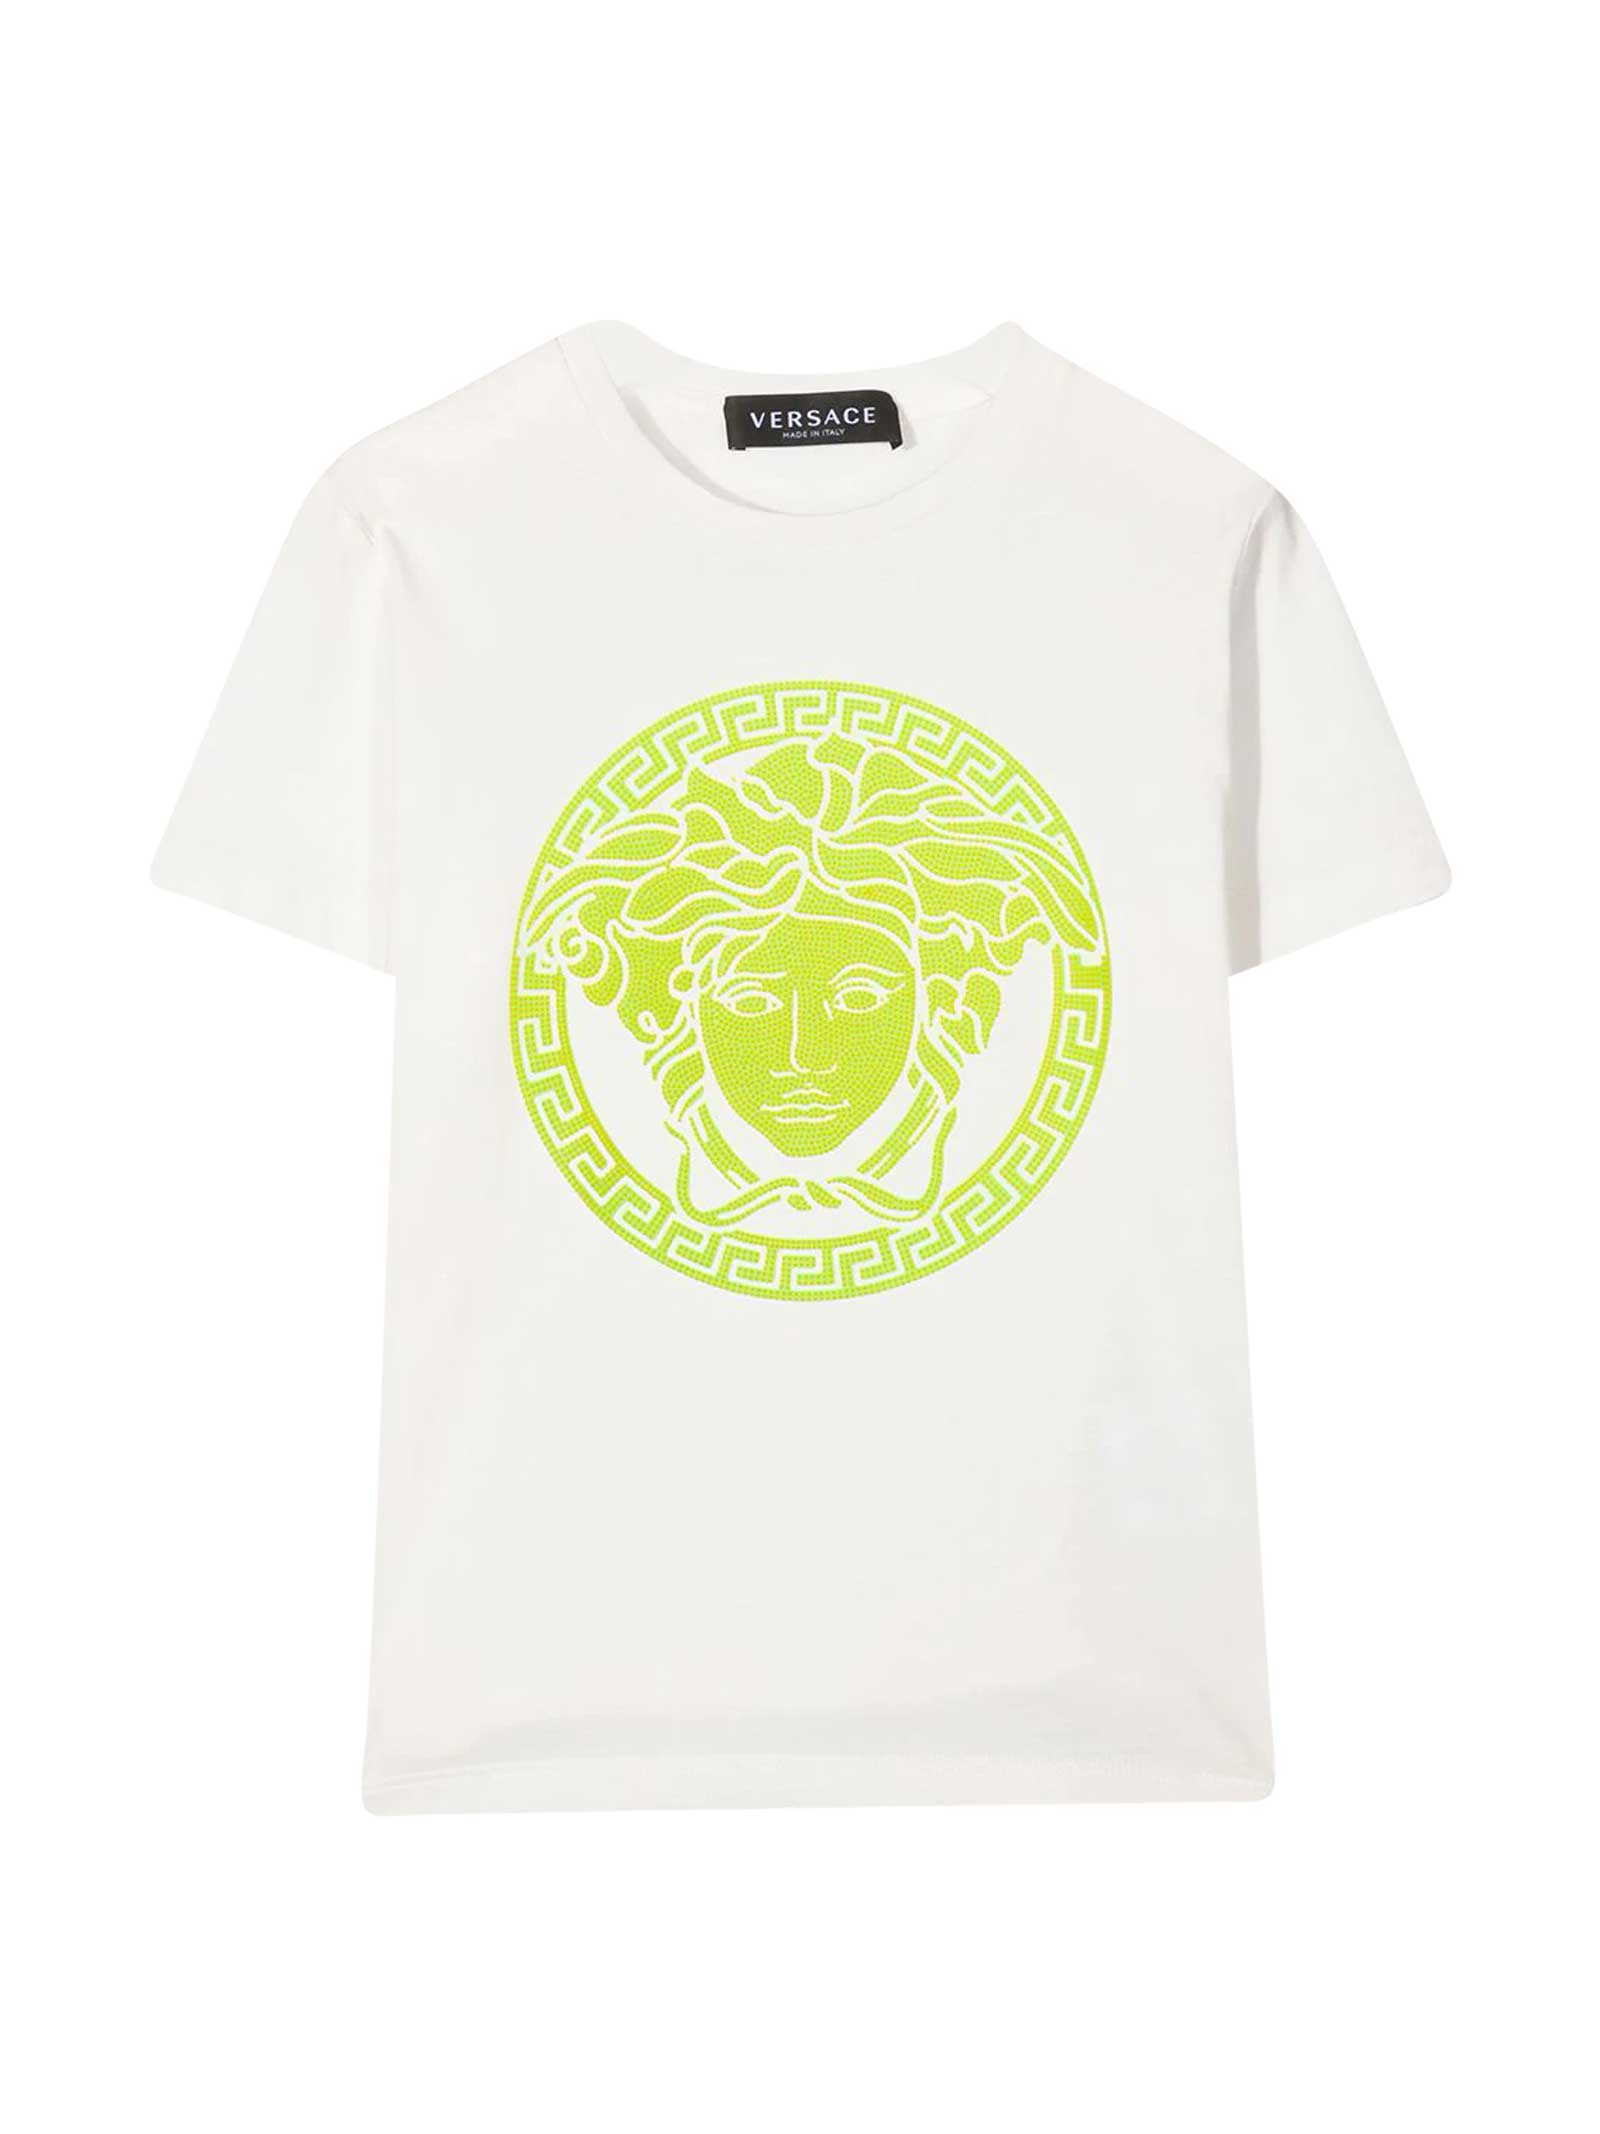 Versace White T-shirt With Multicolor Print Young